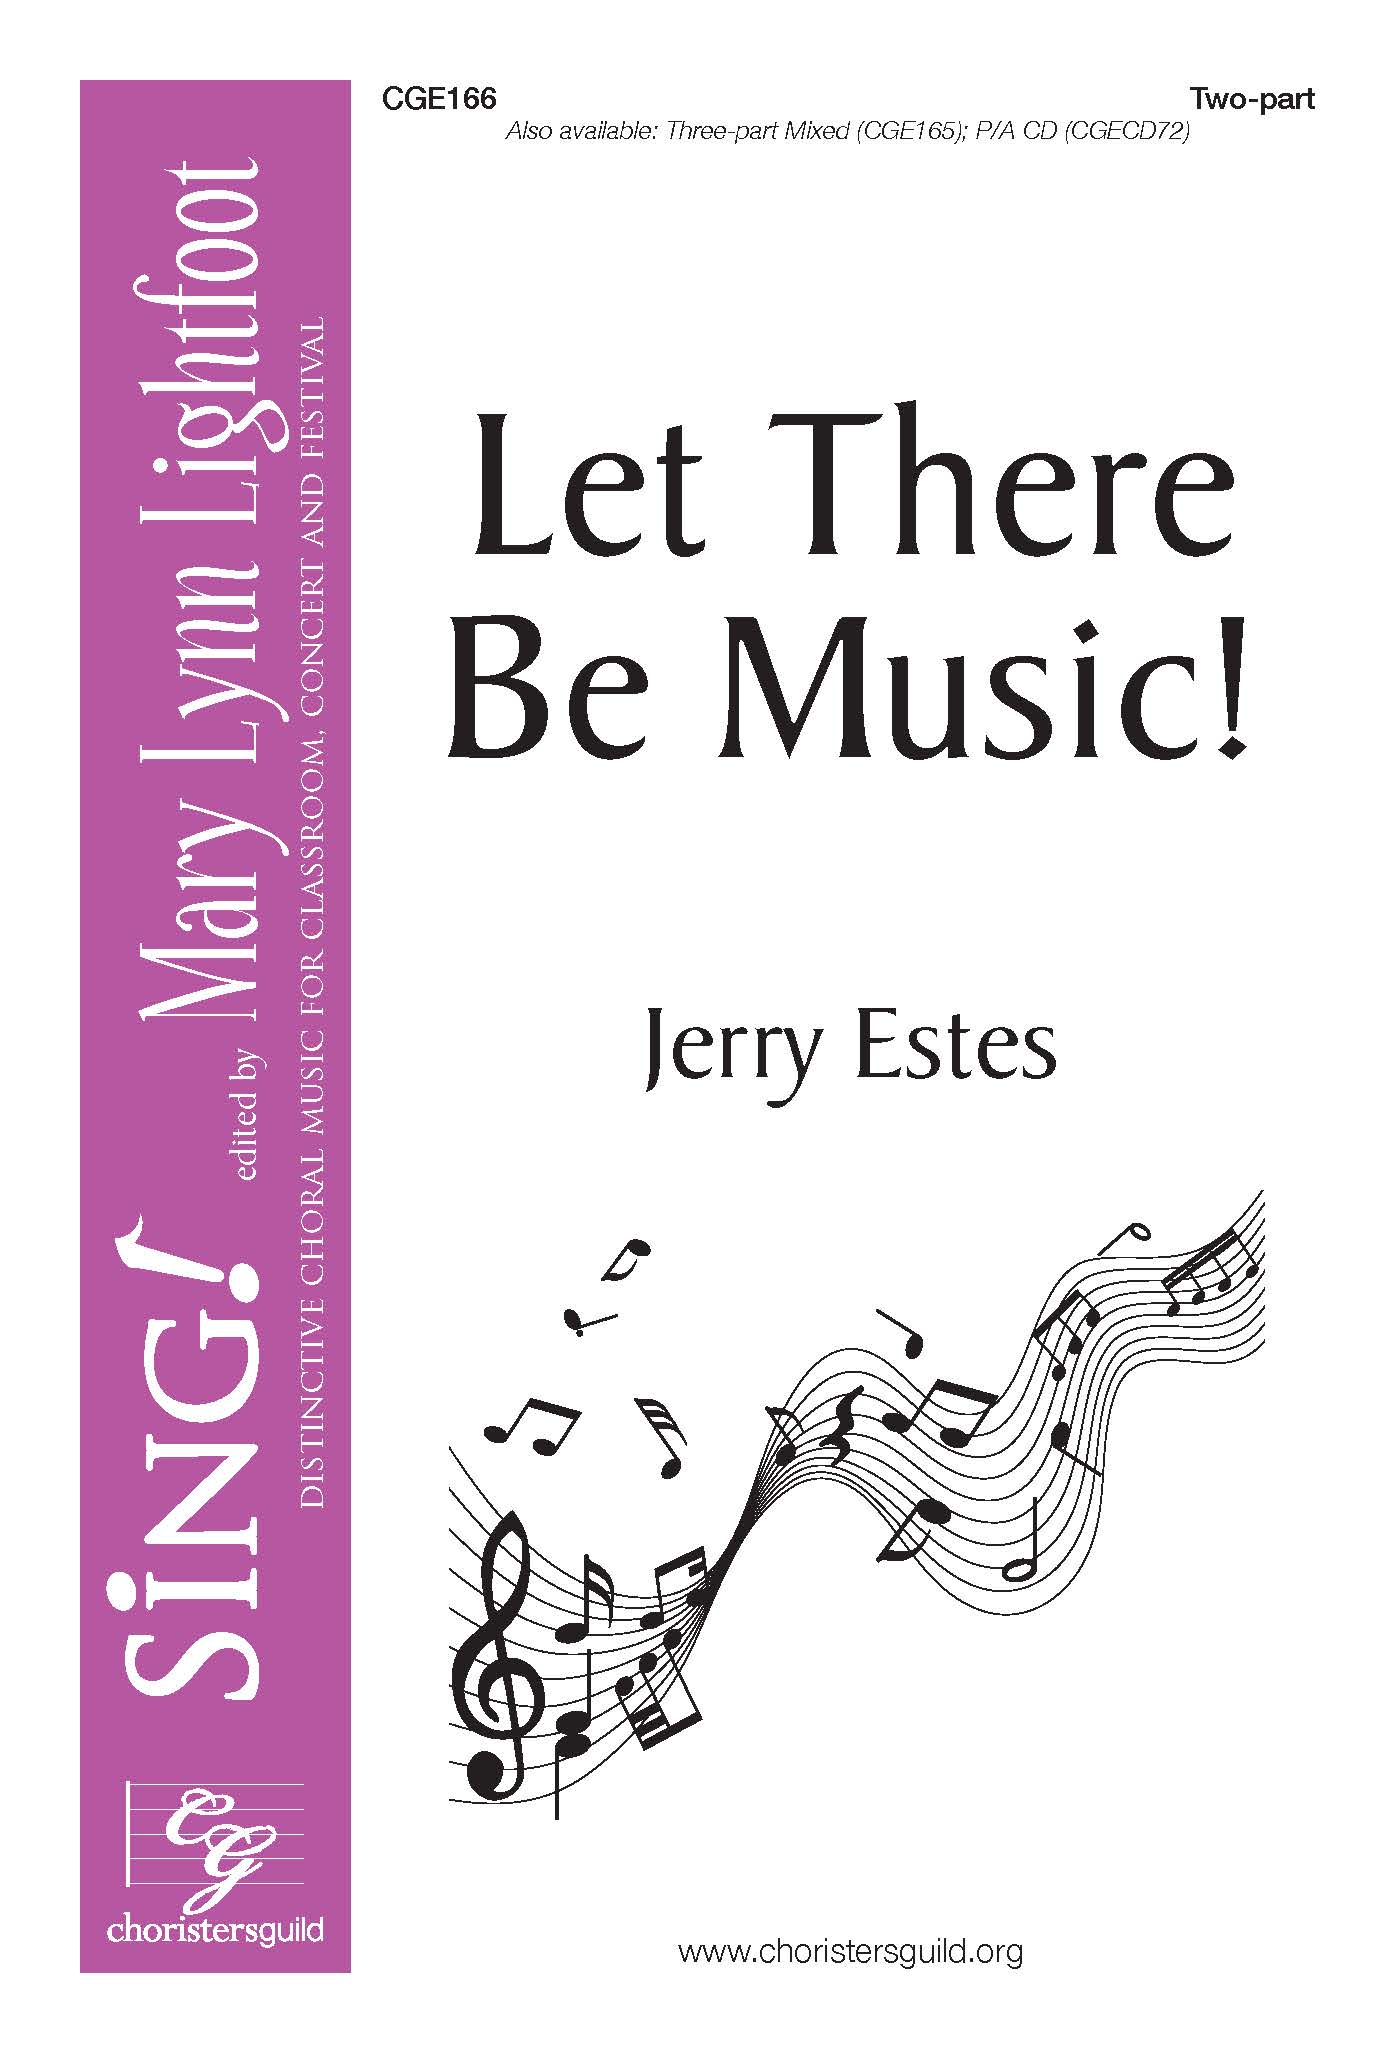 Let There Be Music! Two-part